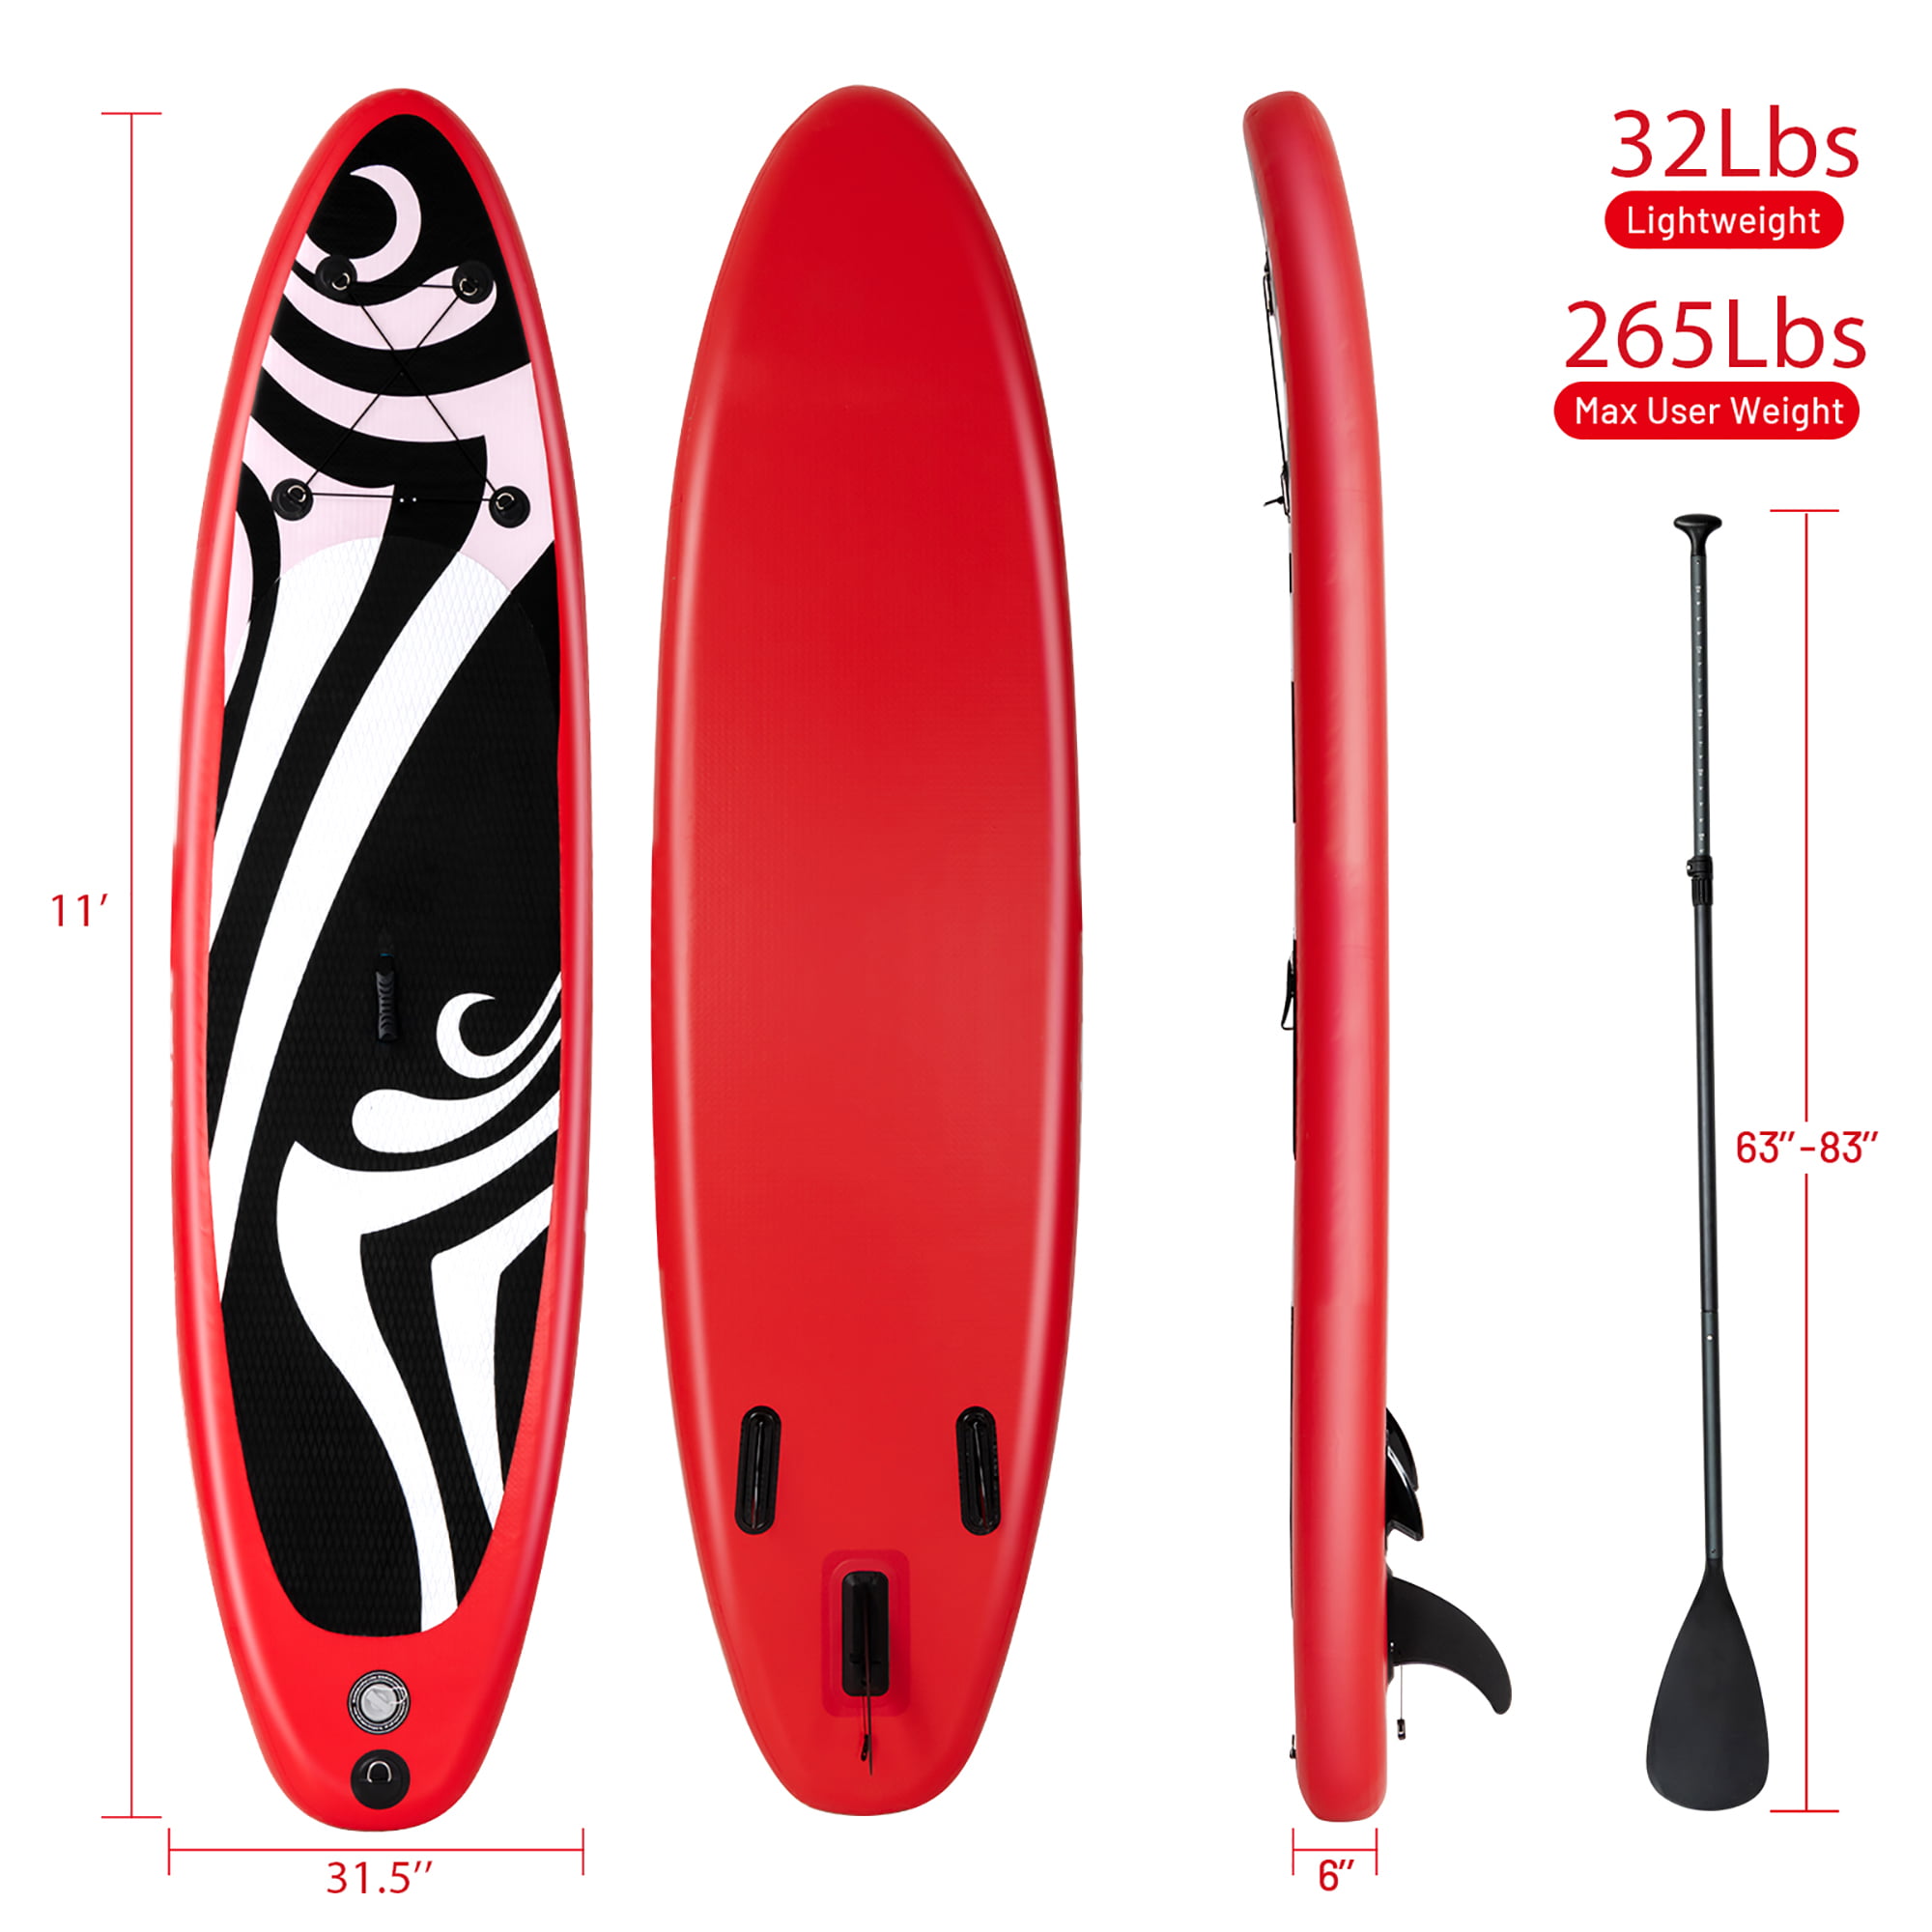 Goplus Inflatable Stand Up Paddle Board Surfboard W/Bag Aluminum Paddle Pump Red - Walmart.com